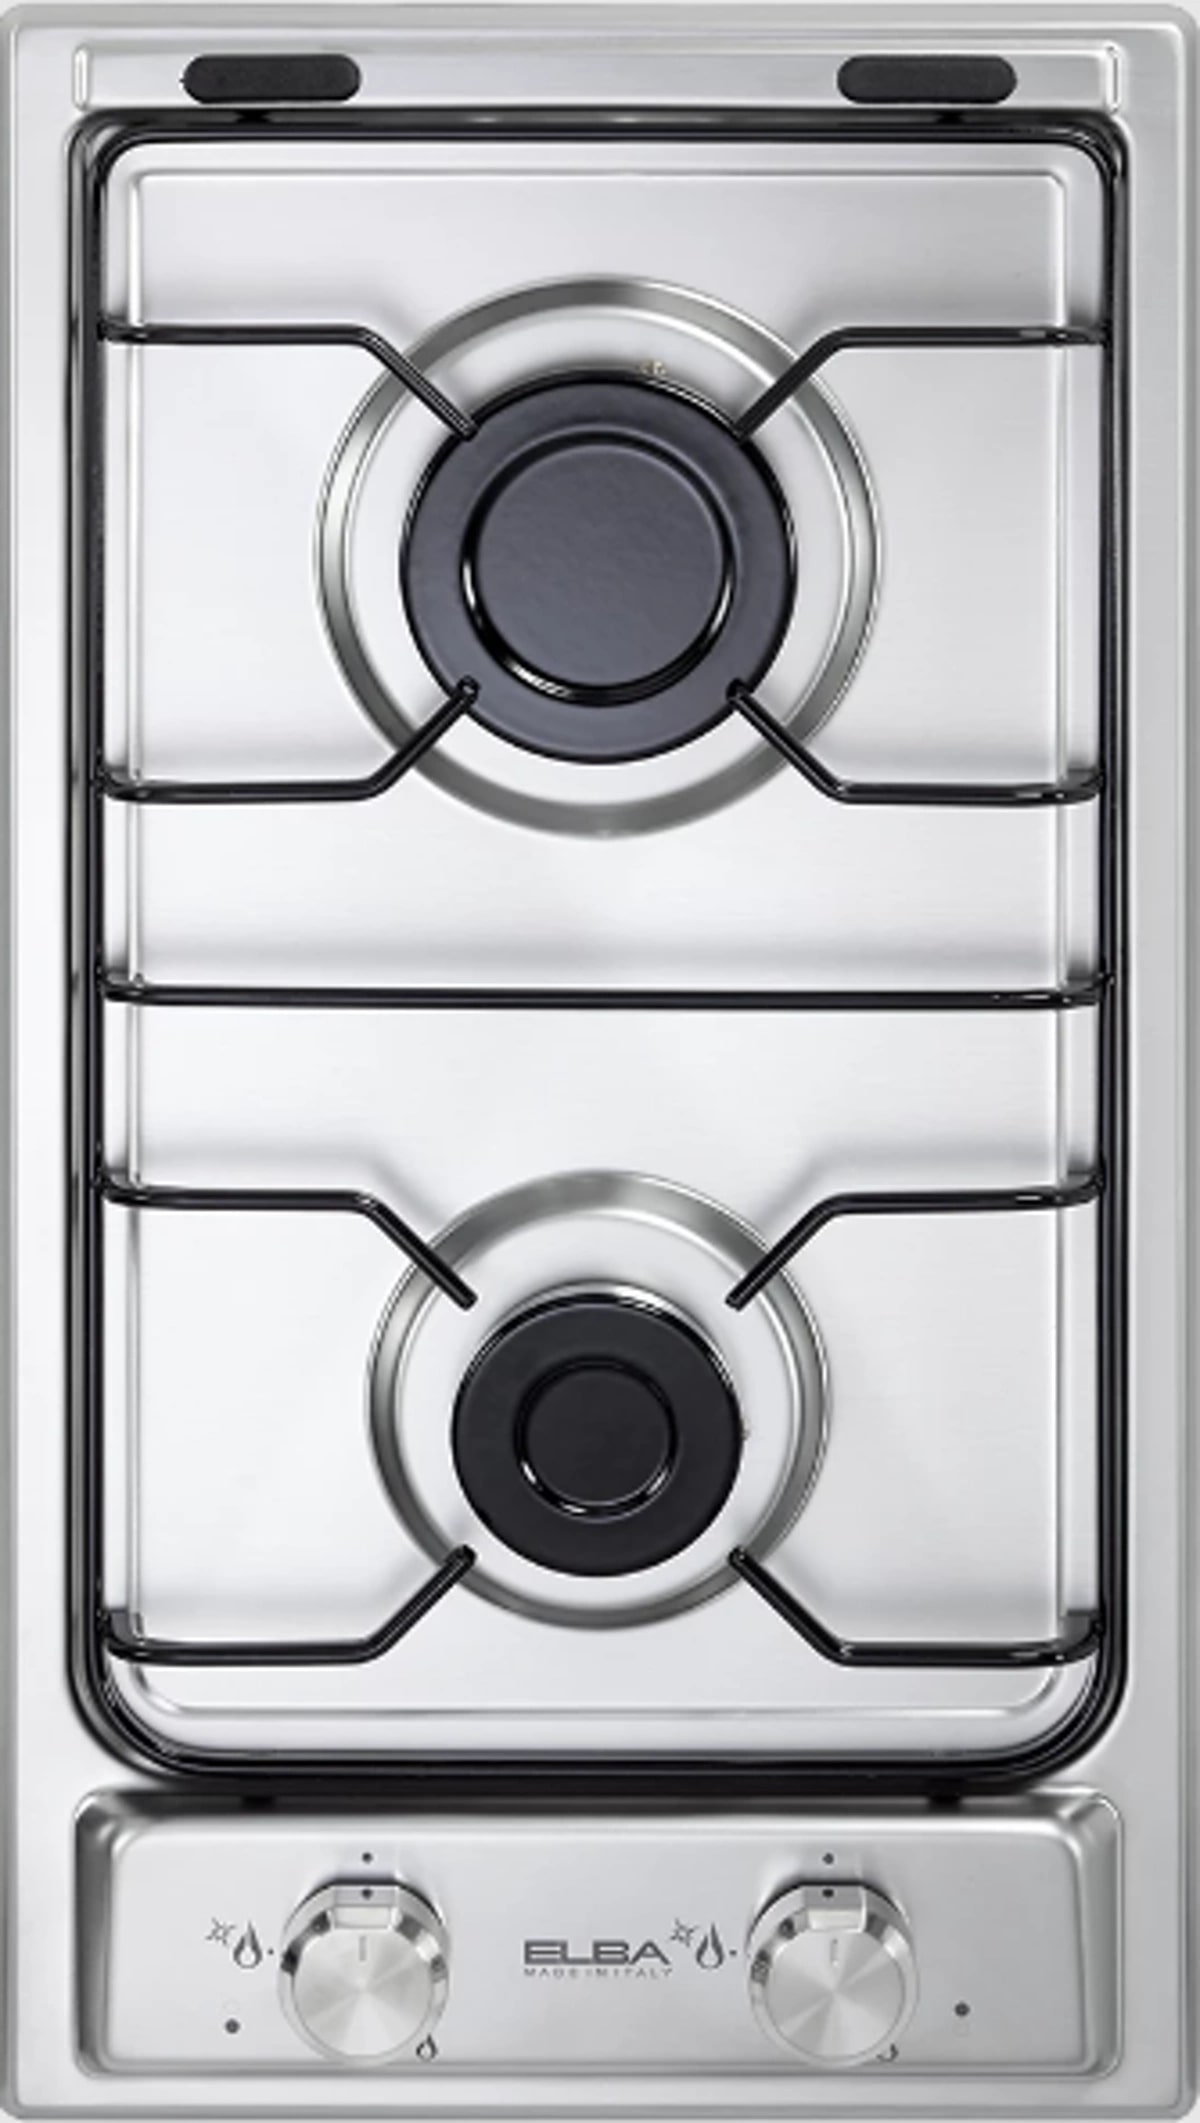 ELBA Gas Hob Built-in 30 cm Stainless Steel Enamelled Pan Supports